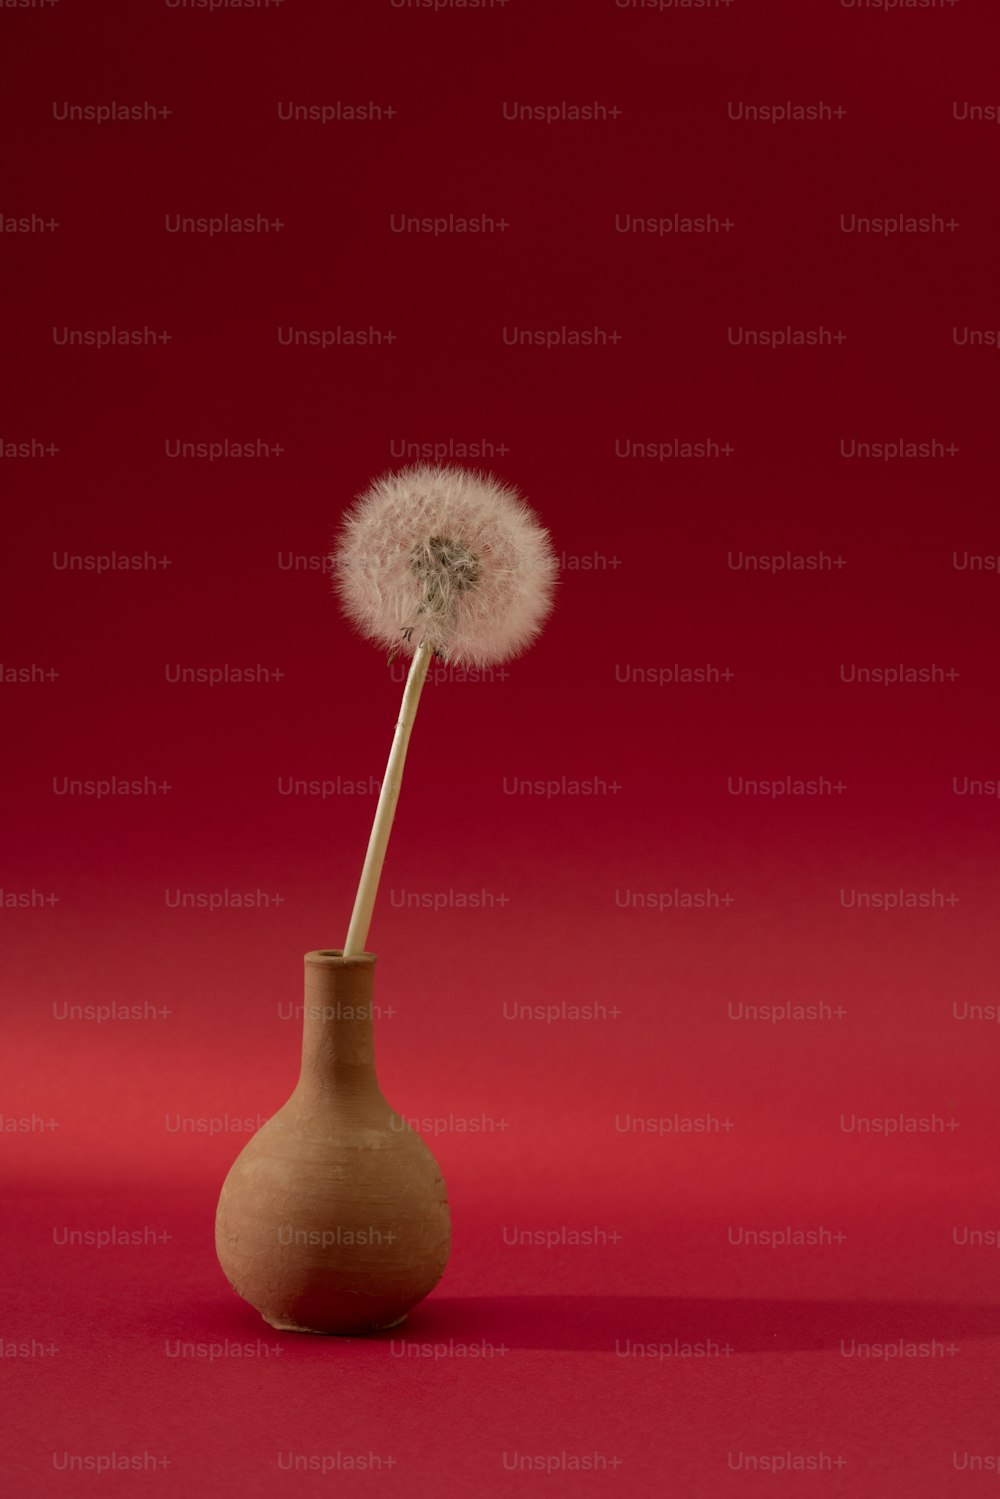 a dandelion in a vase on a red background